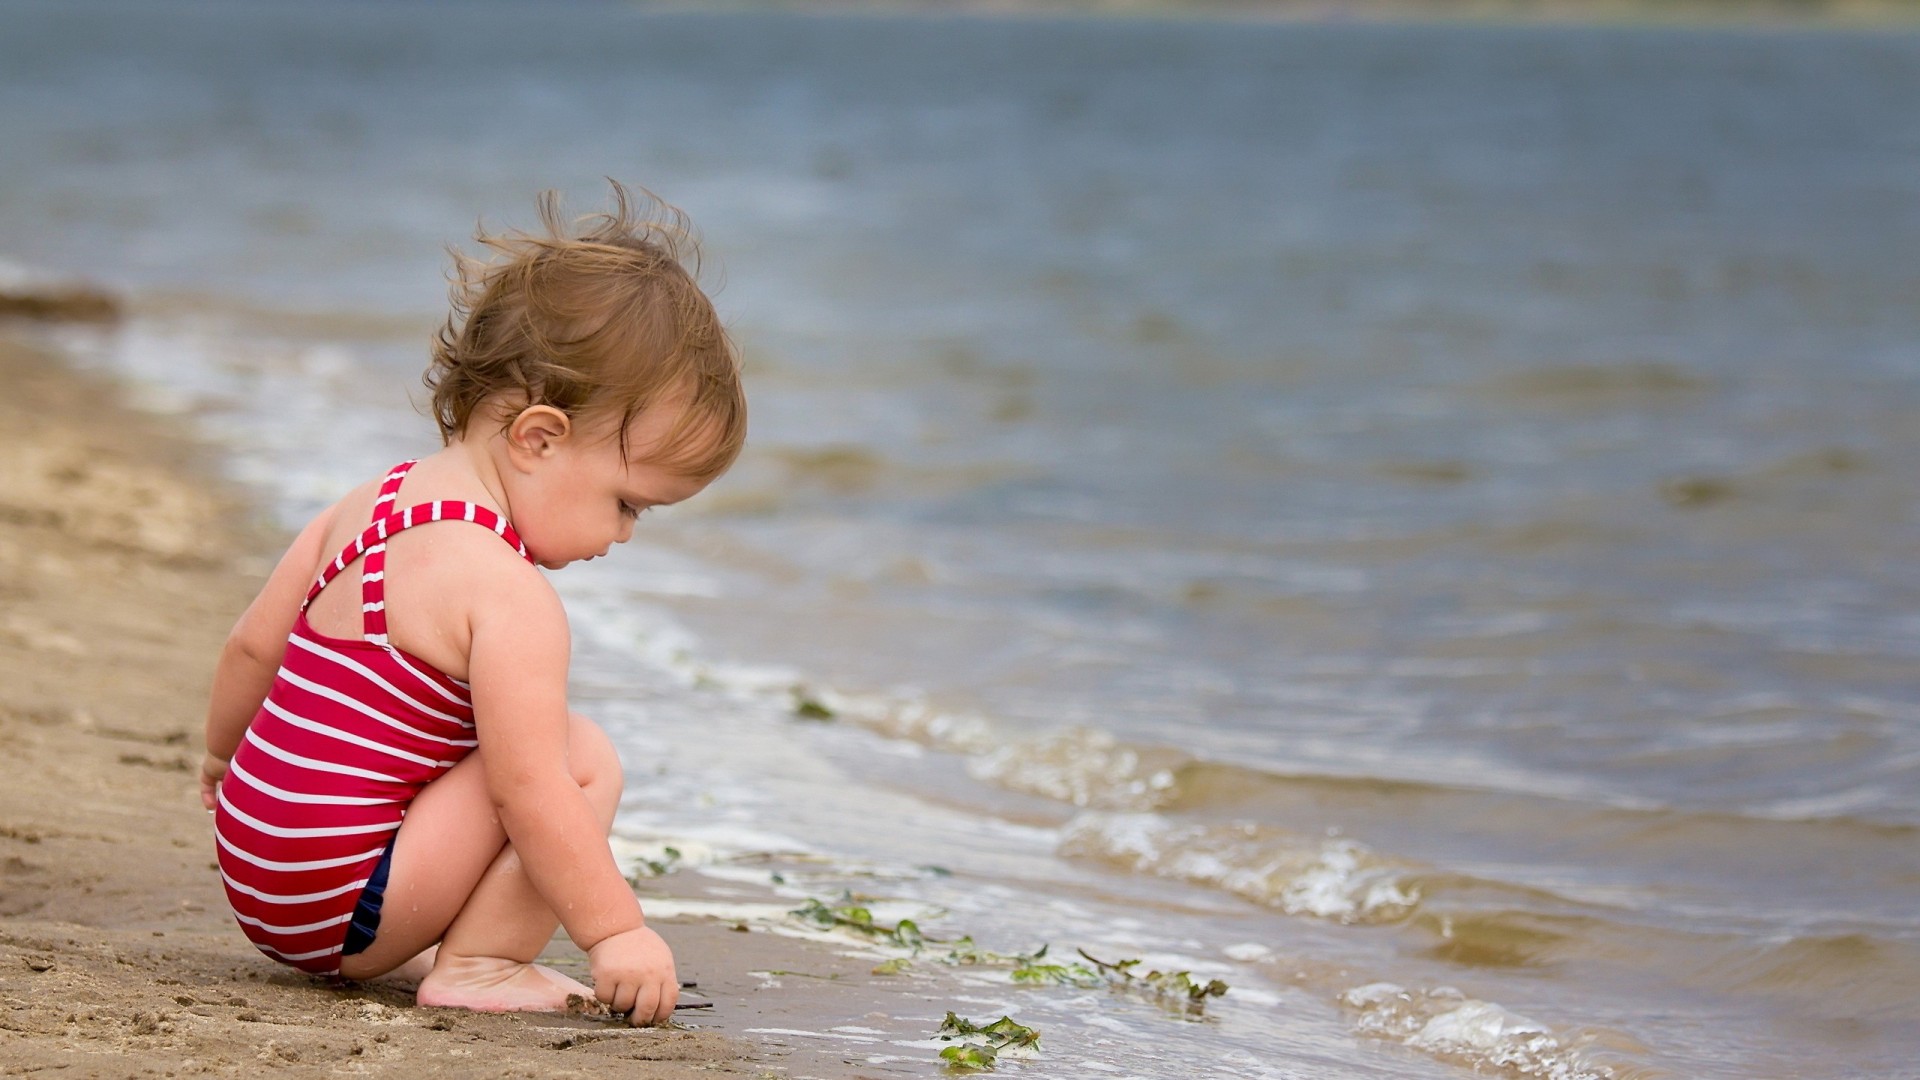 45 Small and Cute Baby Wallpaper download for free